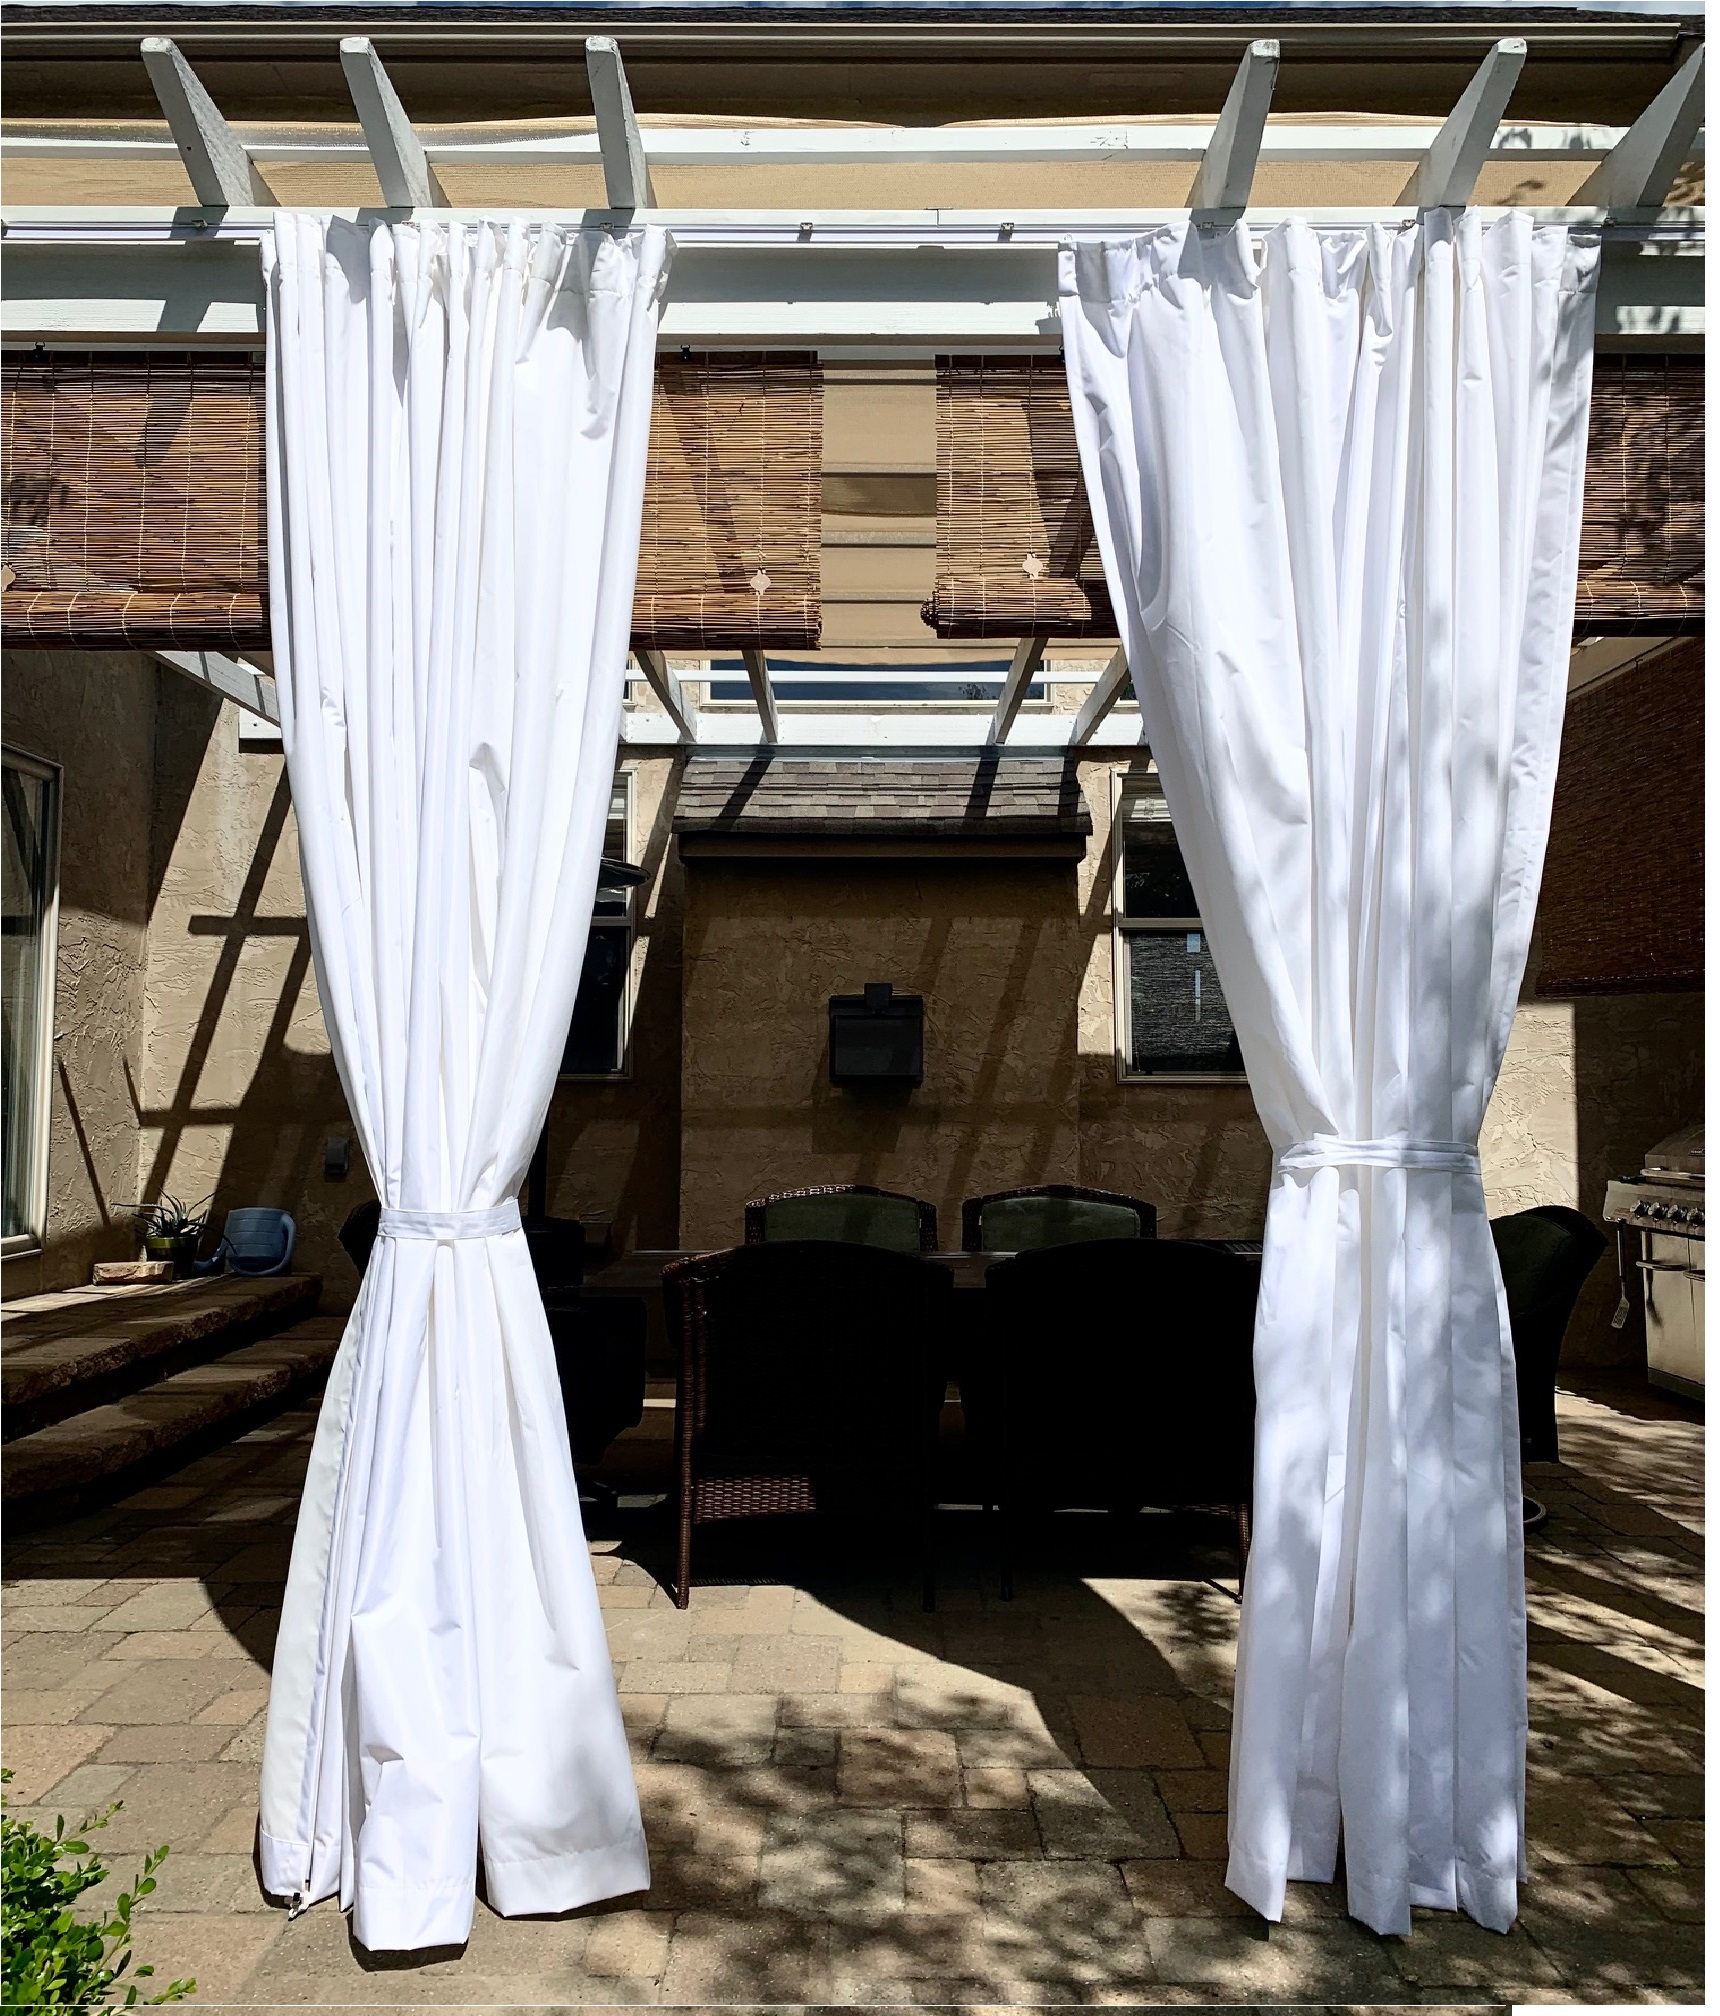 Custom Outdoor Curtains with Large #12 Grommets (Recommended)